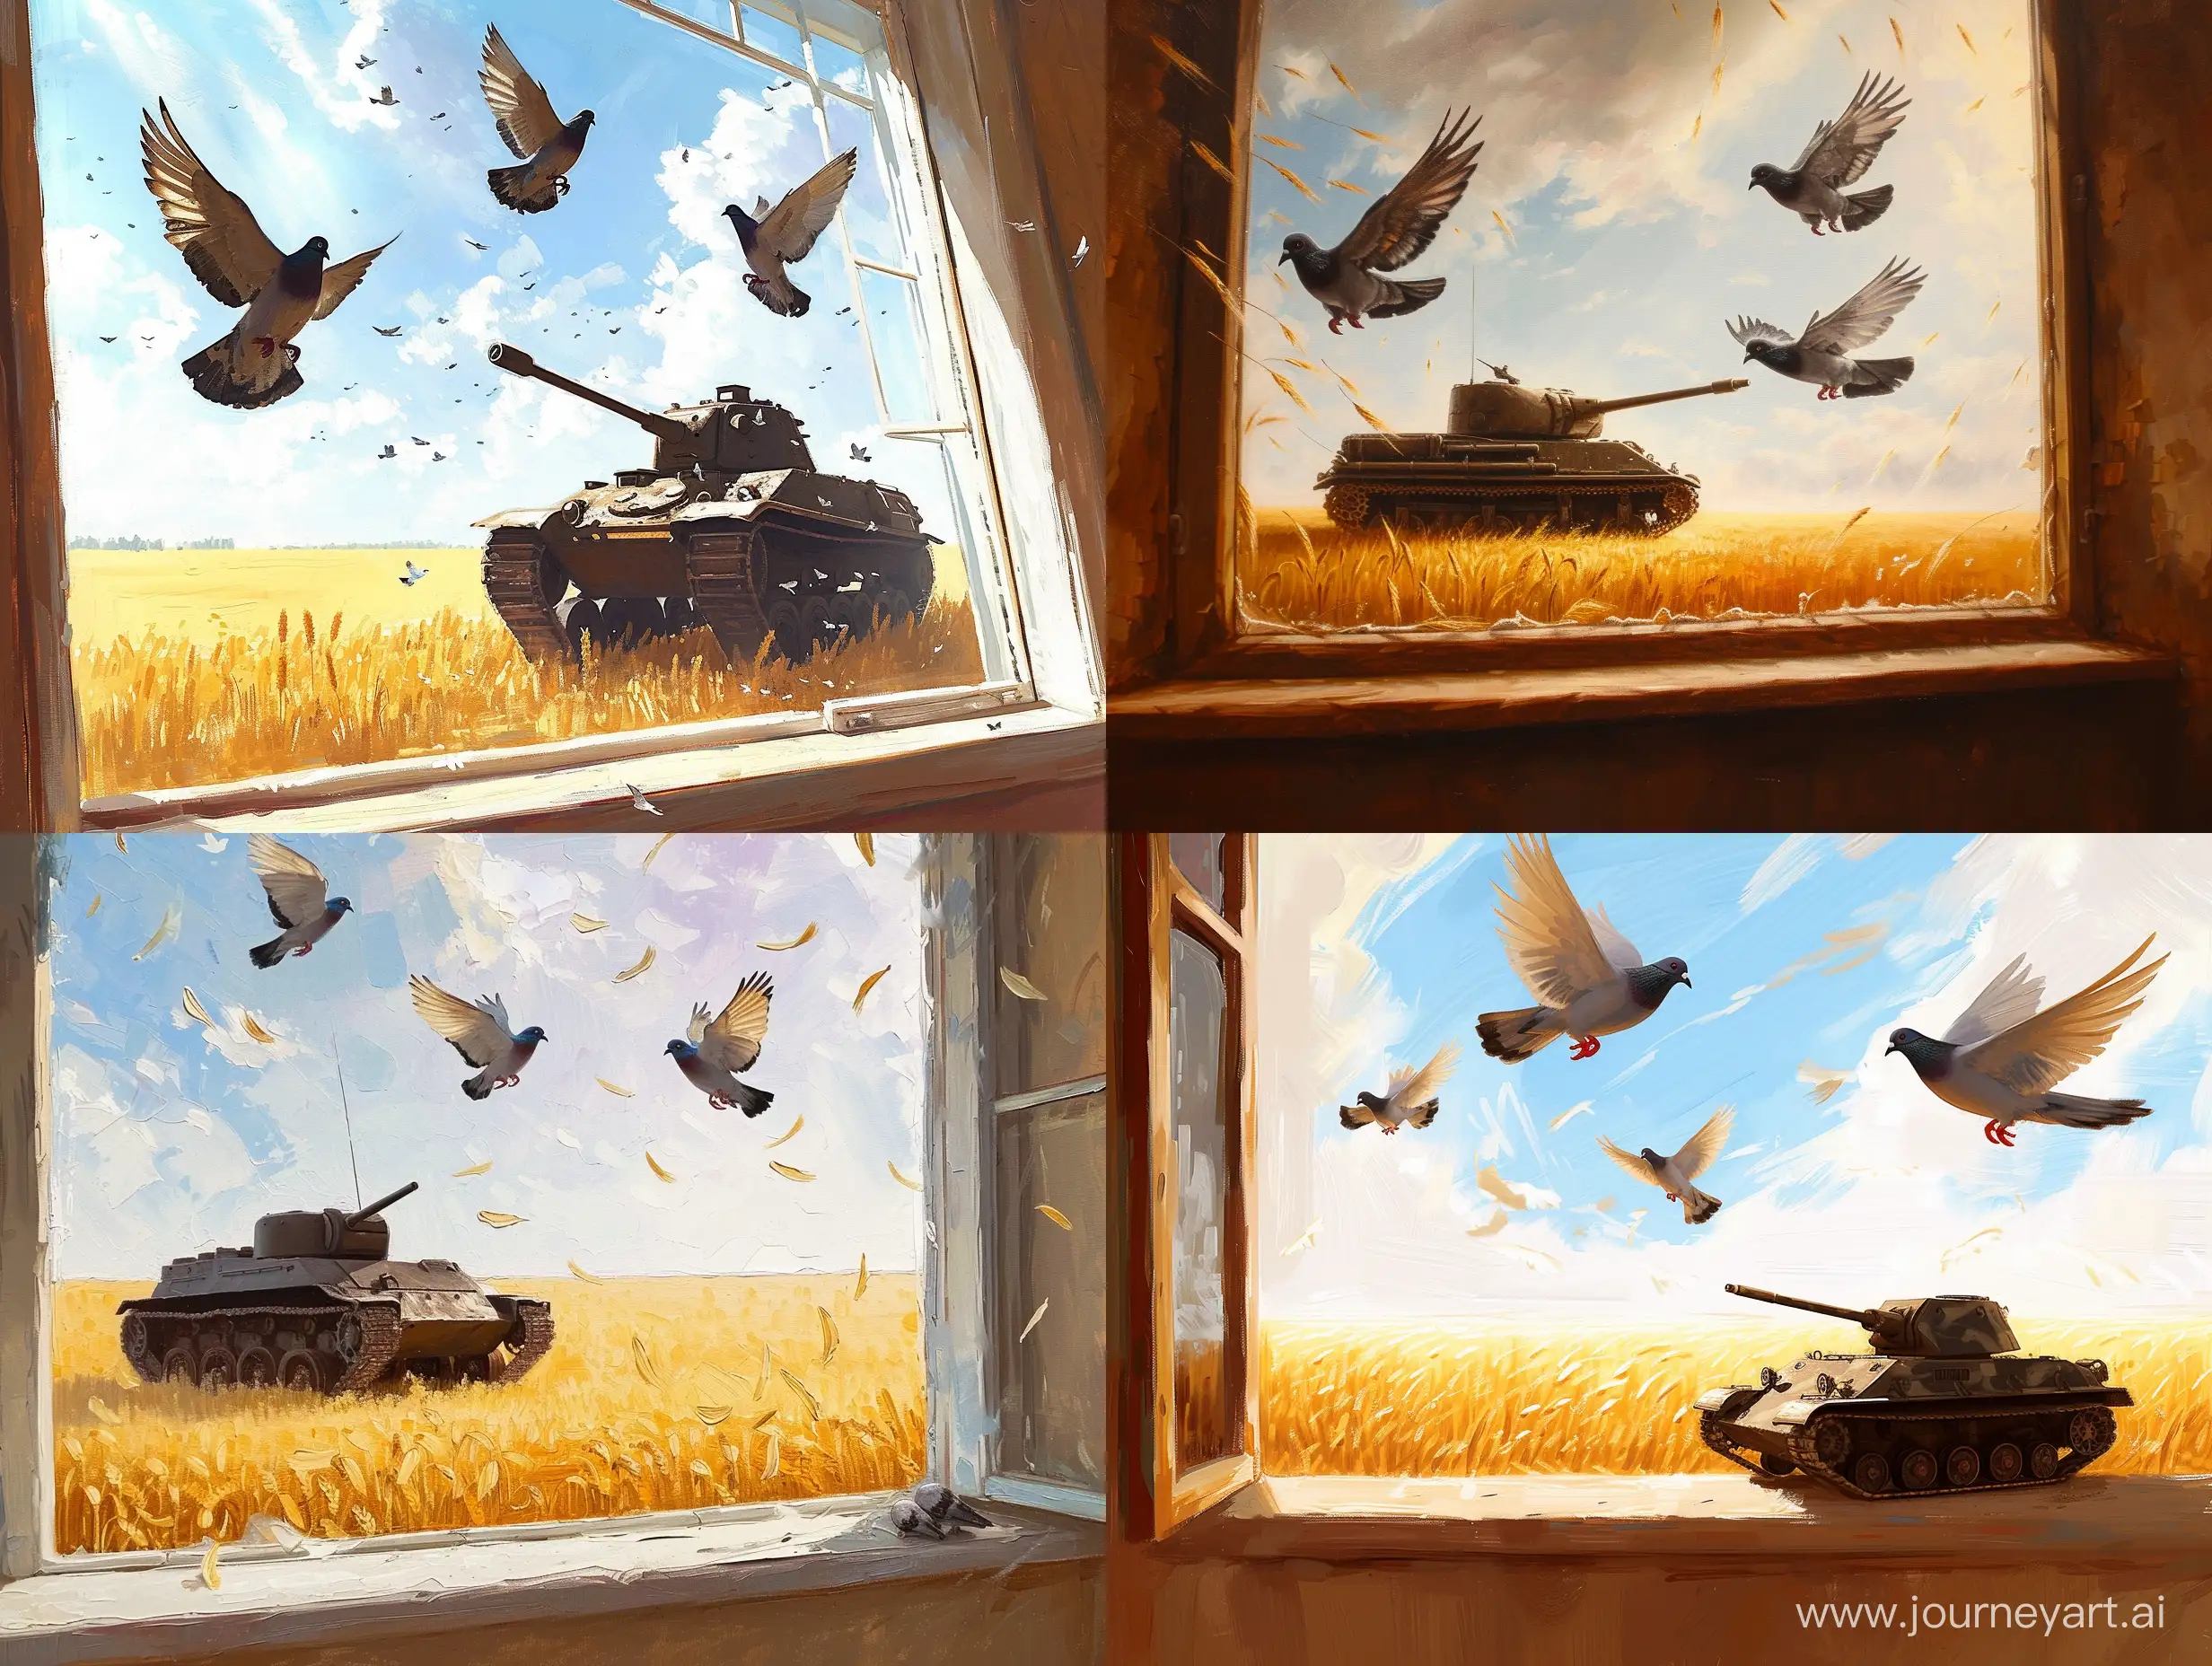 Tank, from the time of the First World War, three pigeons fly around the bright sky, on the windowsill against the background of a wheat field, large strokes, bright, Nikolai Feshin style